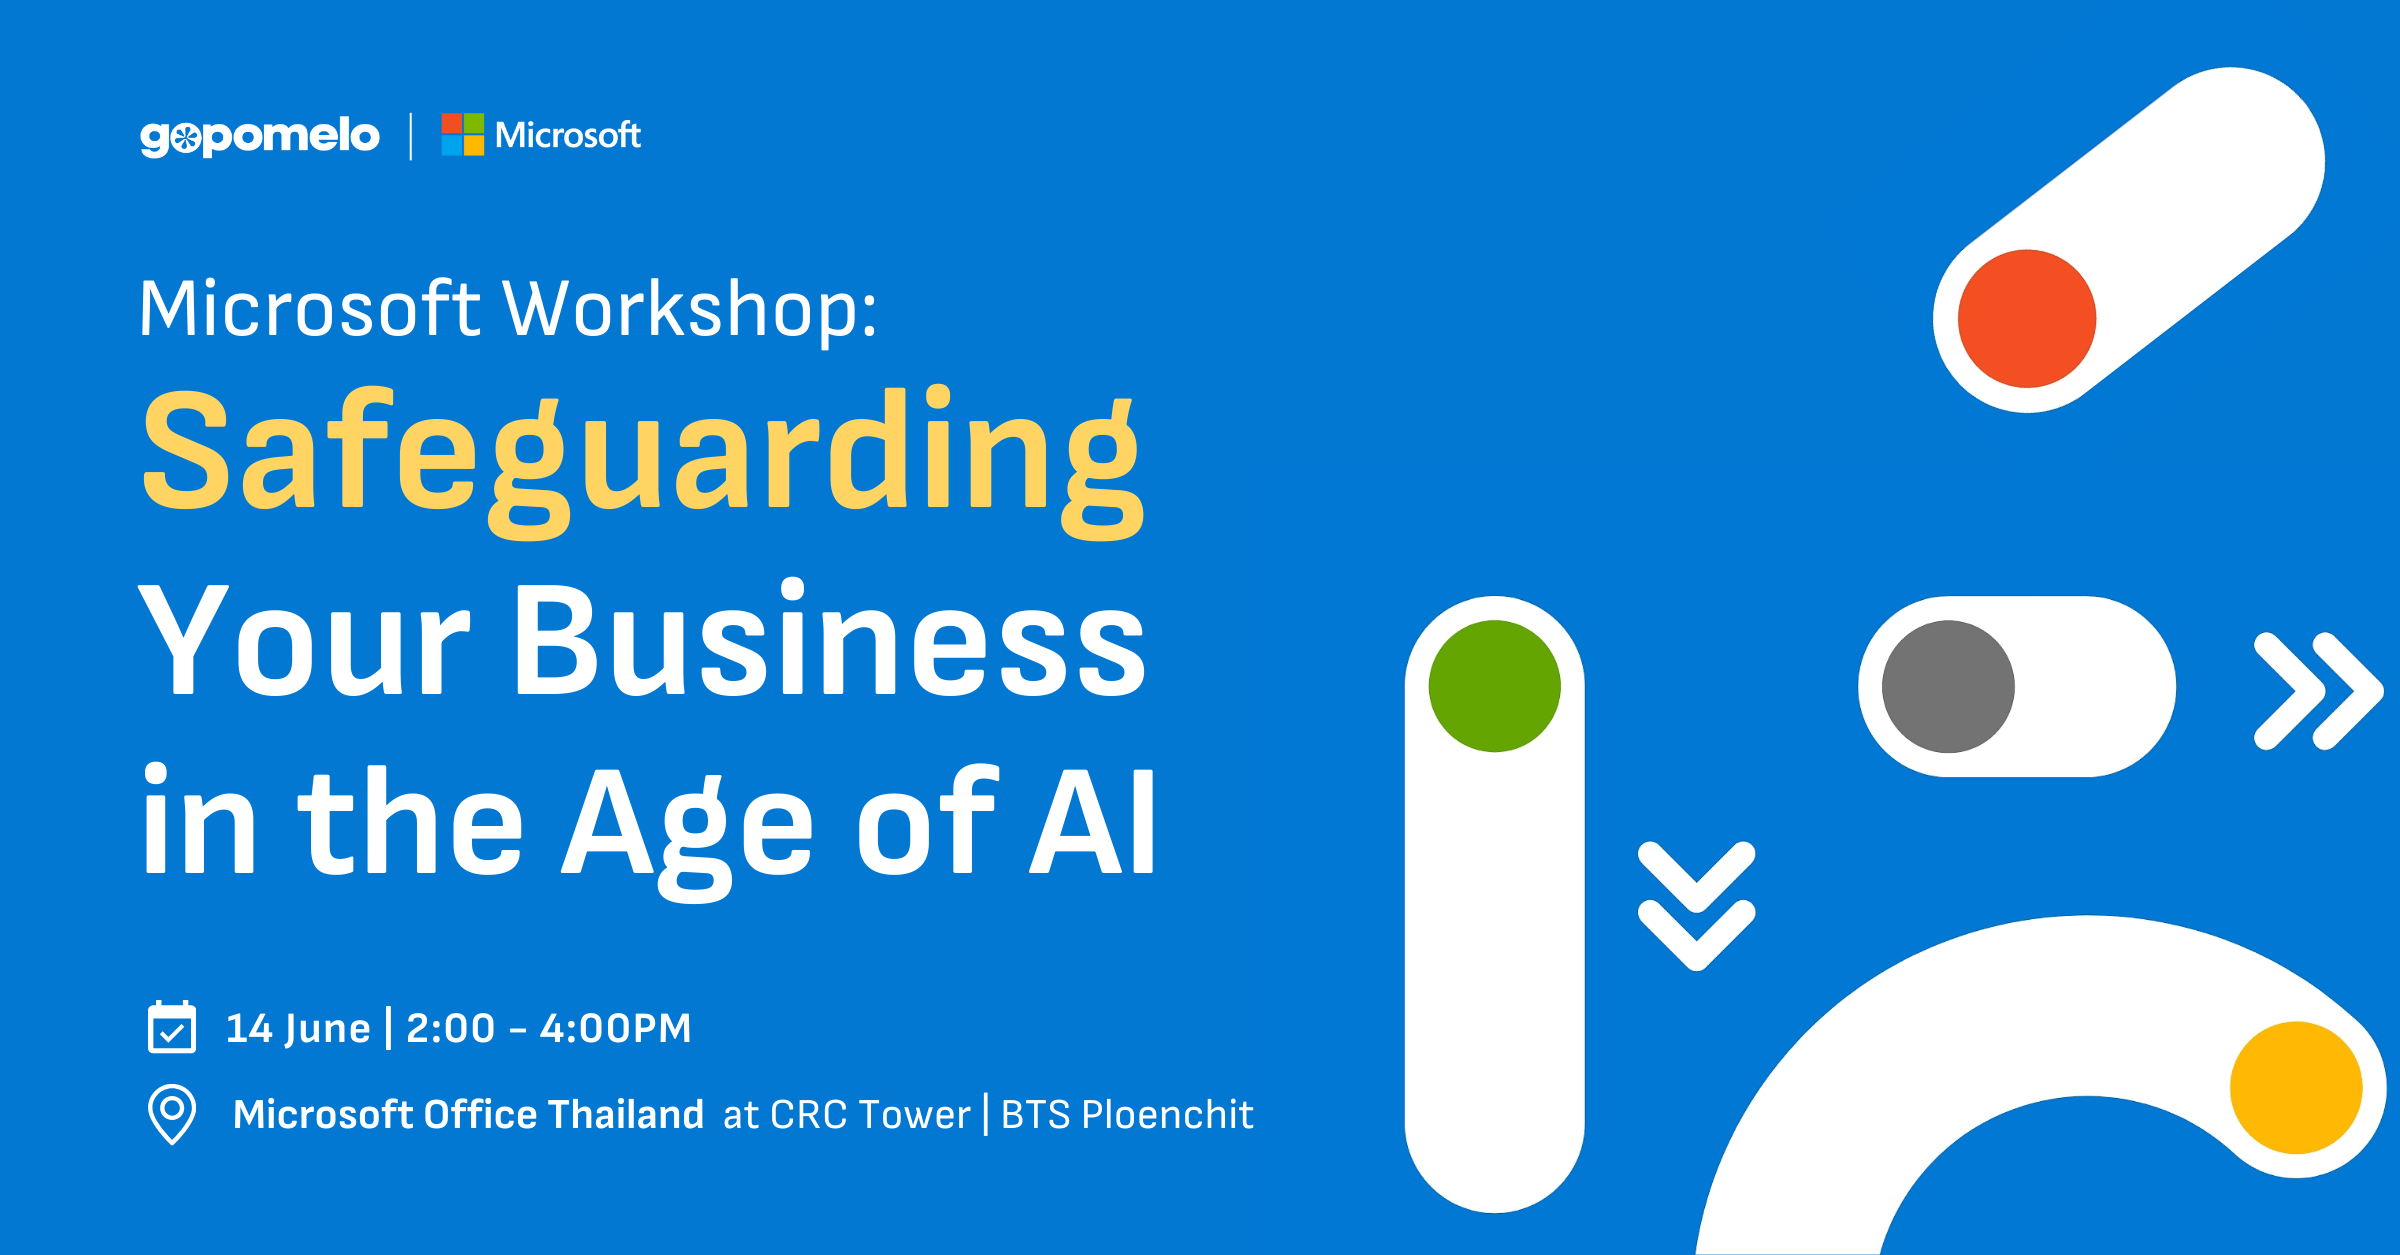 Microsoft Workshop: Safeguarding Your Business in the Age of AI